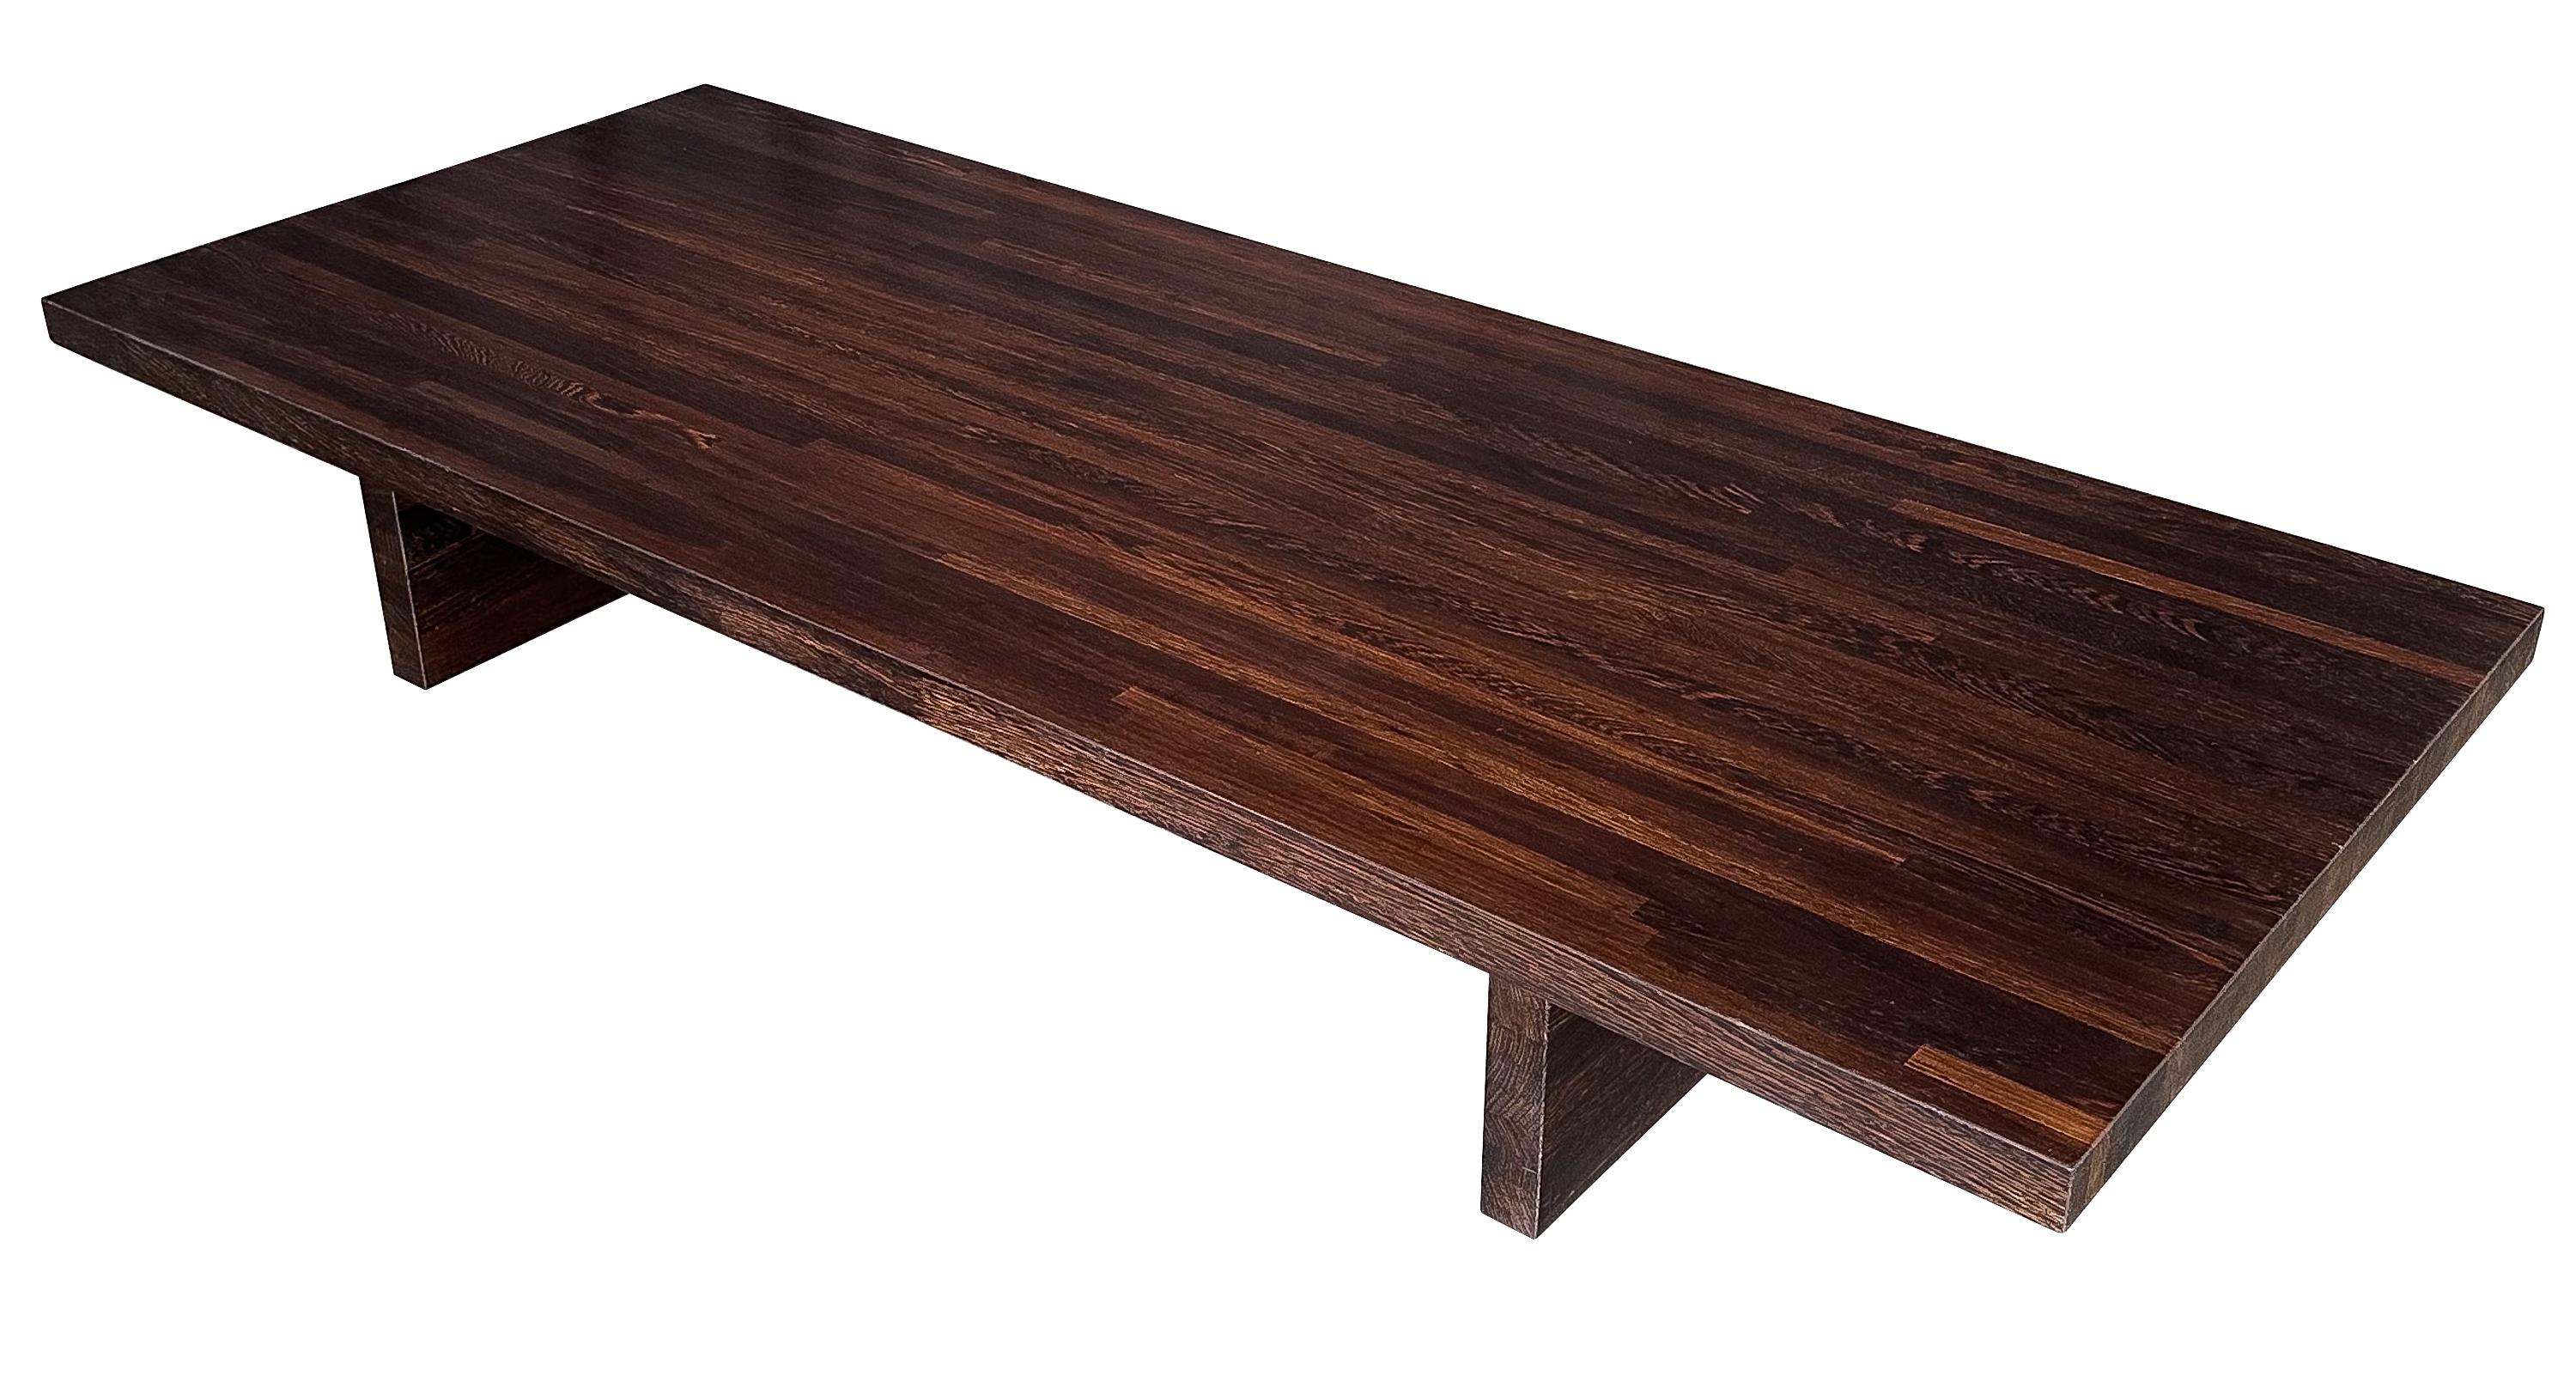 Late 20th Century Minimalist Modern Solid Wenge Wood Low Coffee Table For Sale